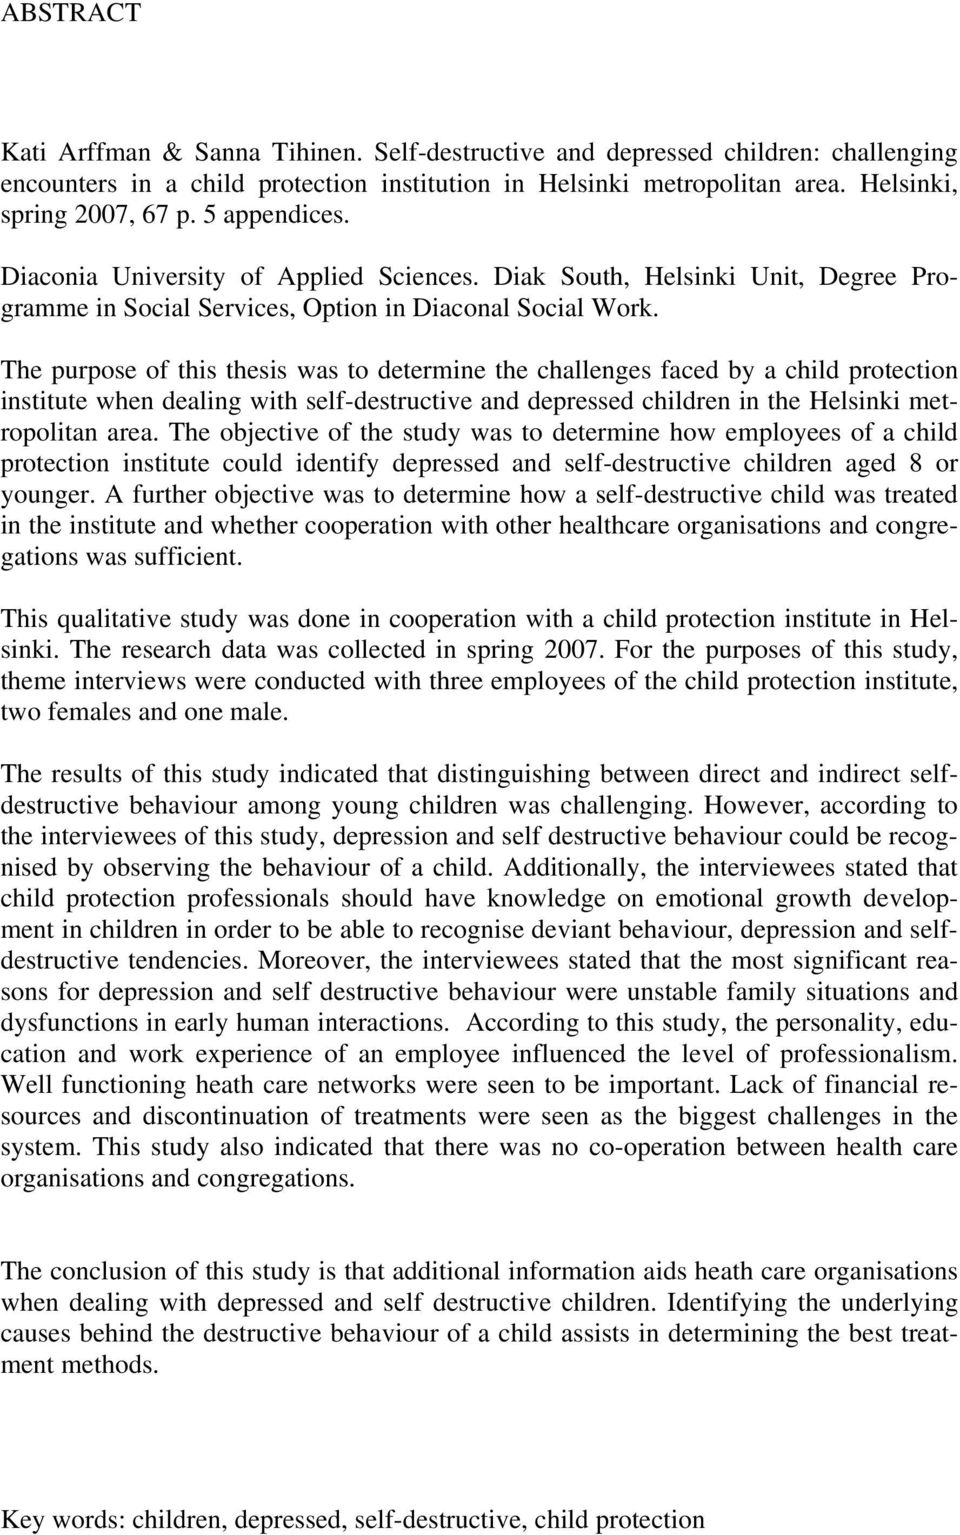 The purpose of this thesis was to determine the challenges faced by a child protection institute when dealing with self-destructive and depressed children in the Helsinki metropolitan area.